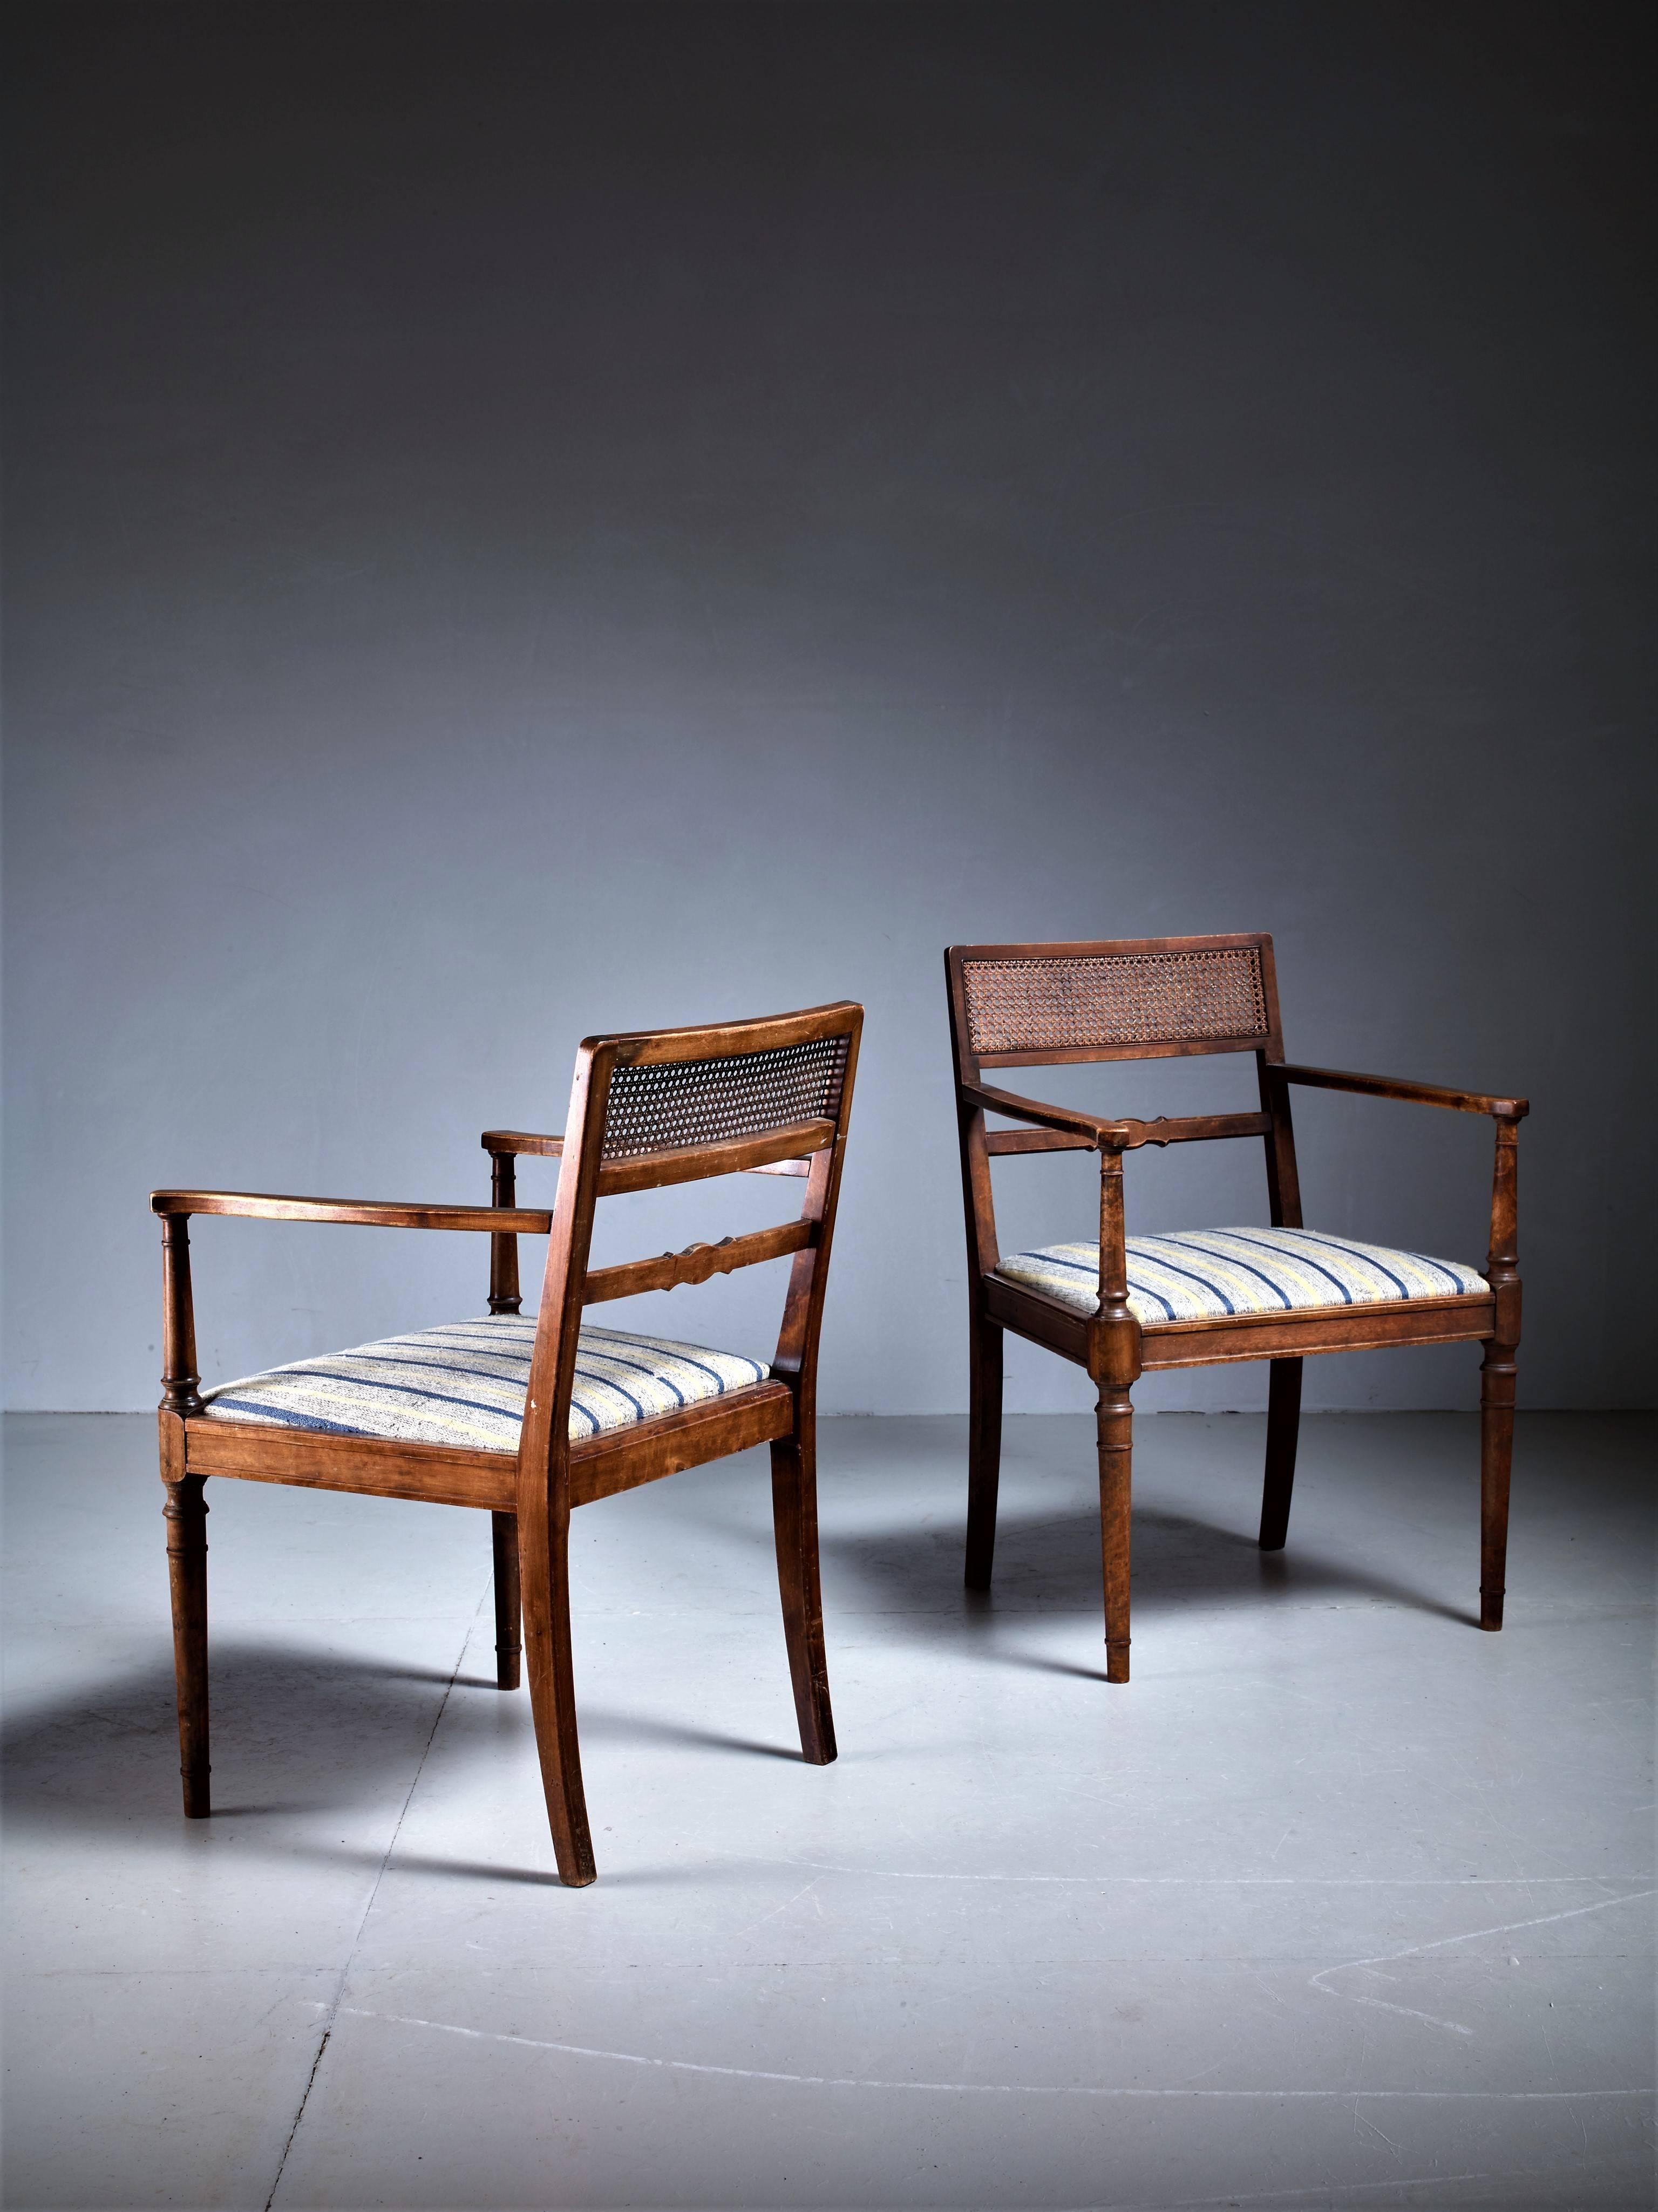 A pair of armchairs designed by Axel Einar Hjorth for Svenska Möbelfabriken, Bodafors. The chairs are made of stained birch with a woven rattan backrest. The seating has a striped fabric upholstery.
Marked 'SMF'.
Wonderful set of chairs that fits